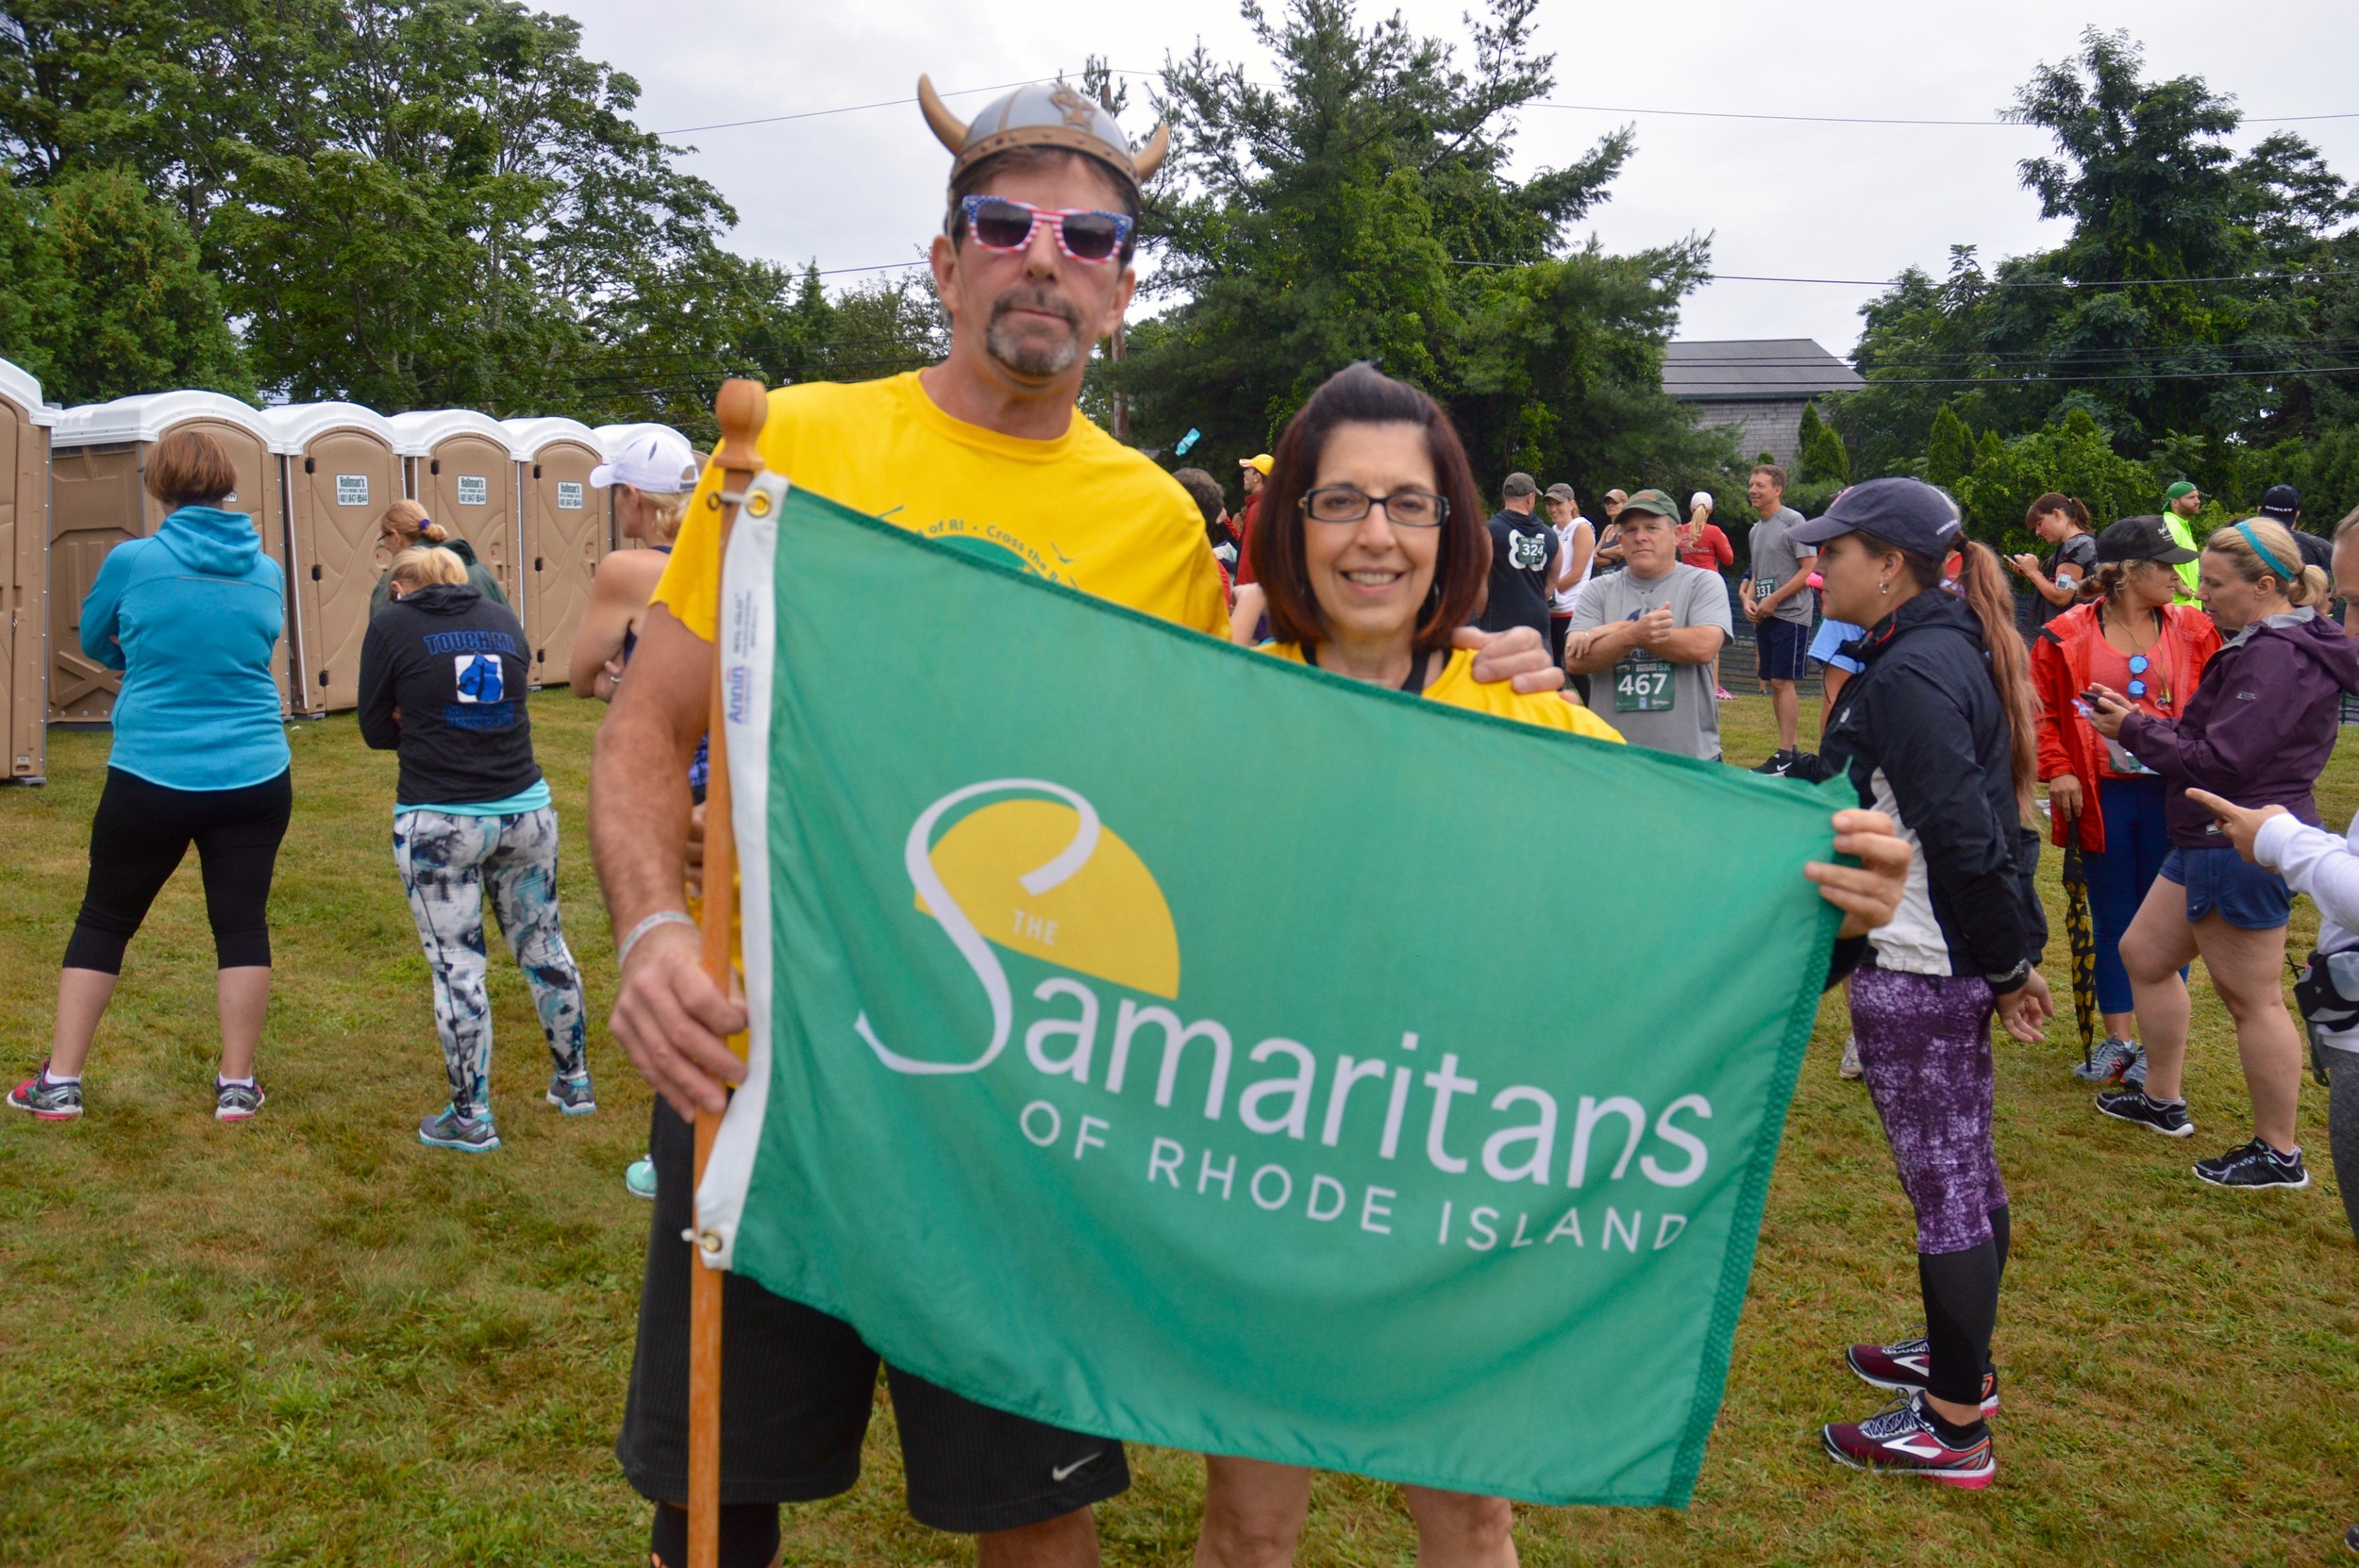 Bryan Ganley and Denise Panichas, executive director of the Samaritans of Rhode Island, just before the race.